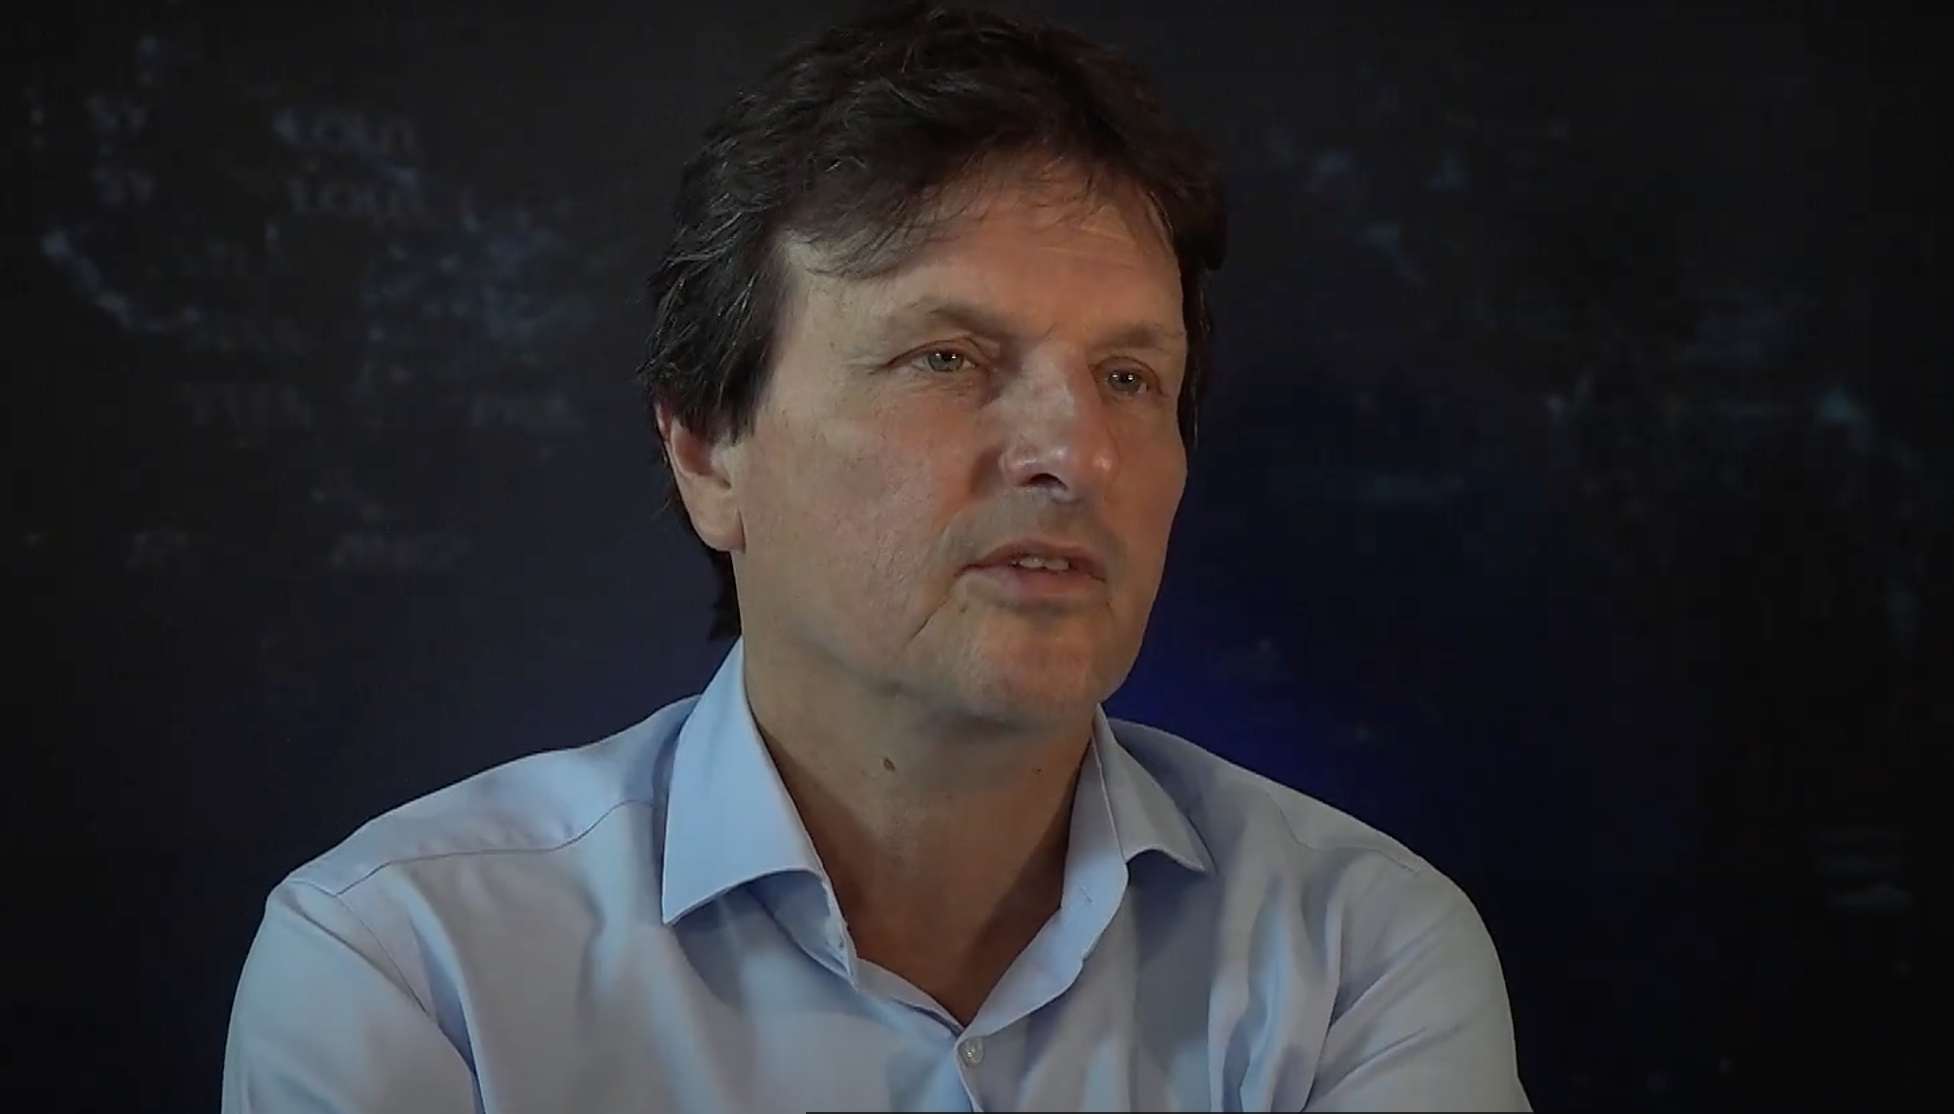 “We need to proactively manage our data differently”, watch latest film by Onno Schellekens